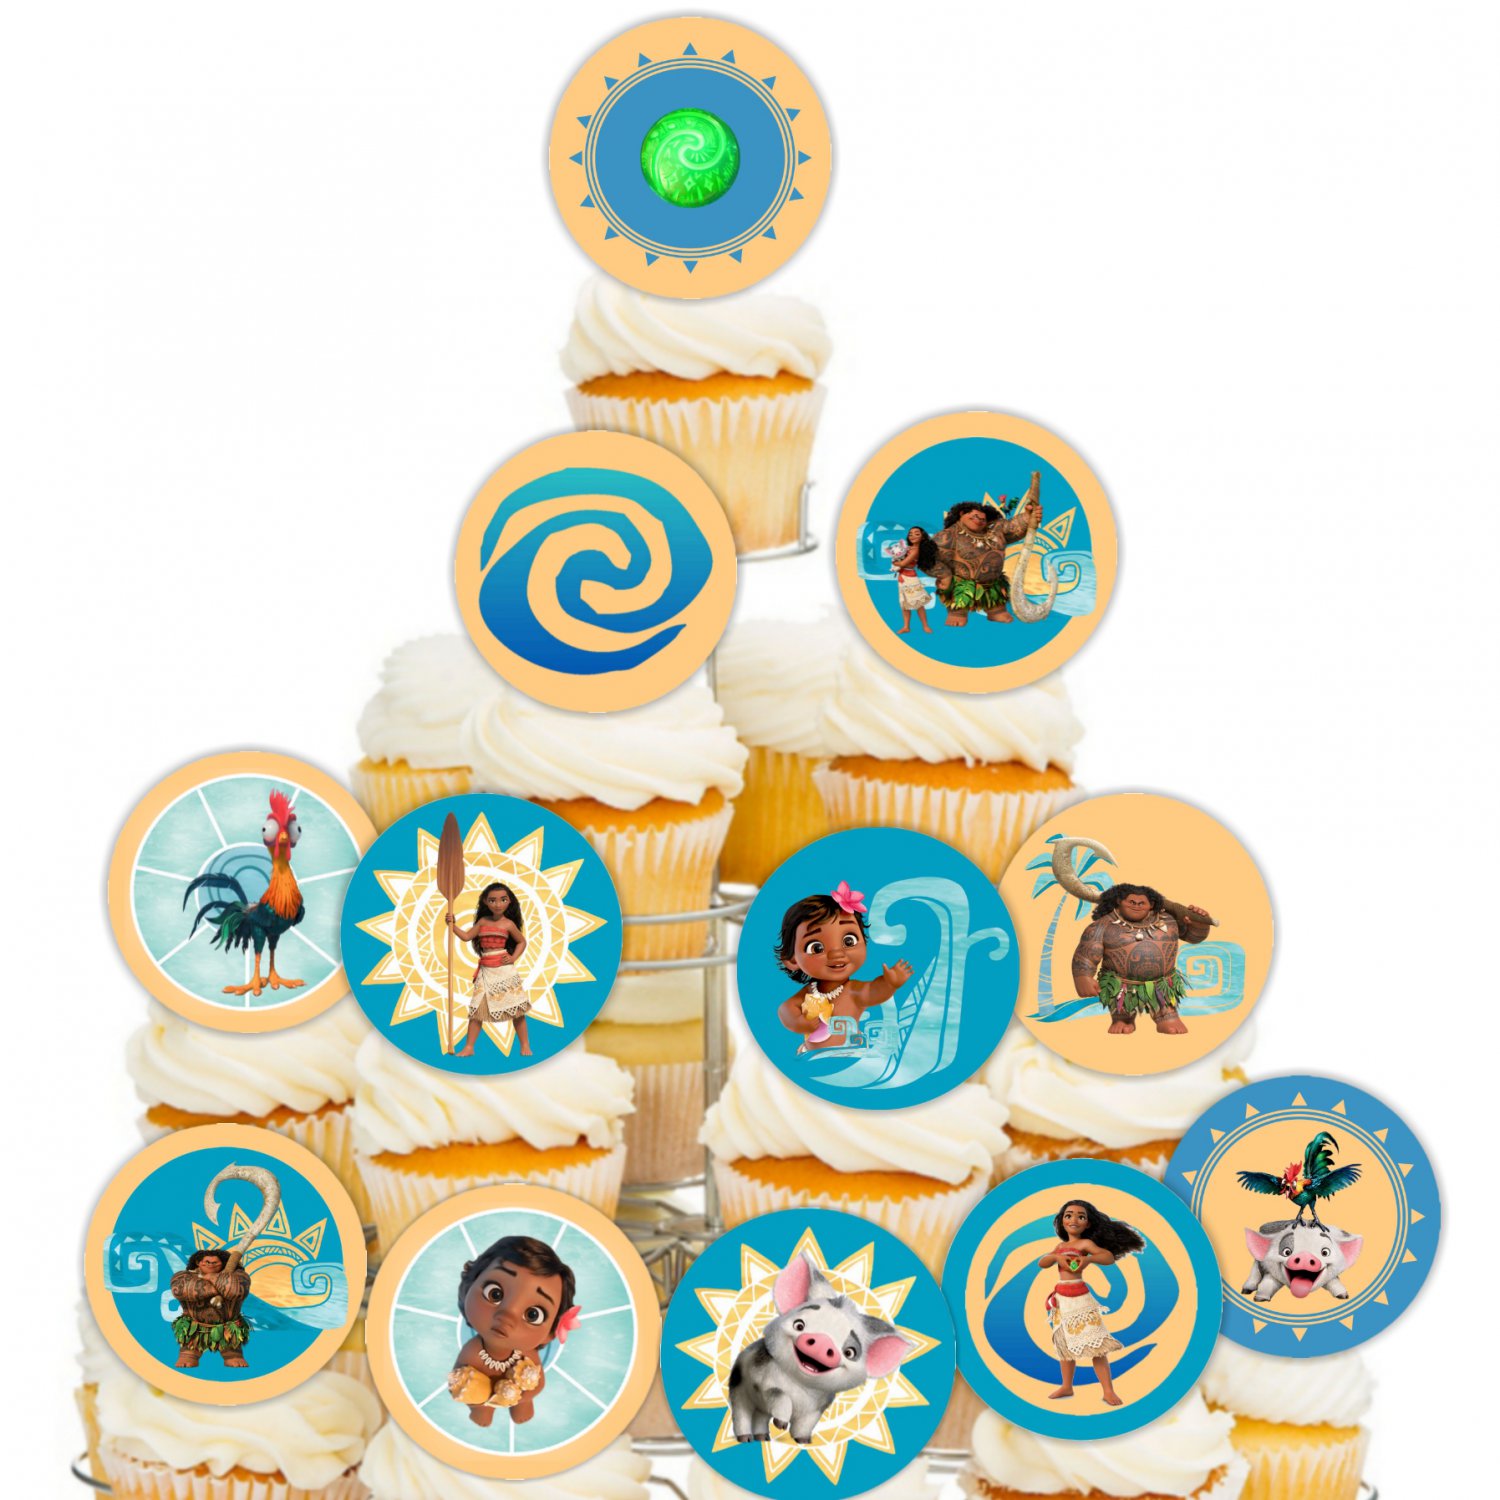 Moana Design#3 Instant Download Cupcake Toppers Birthday Party Printable Digital doll topper cake